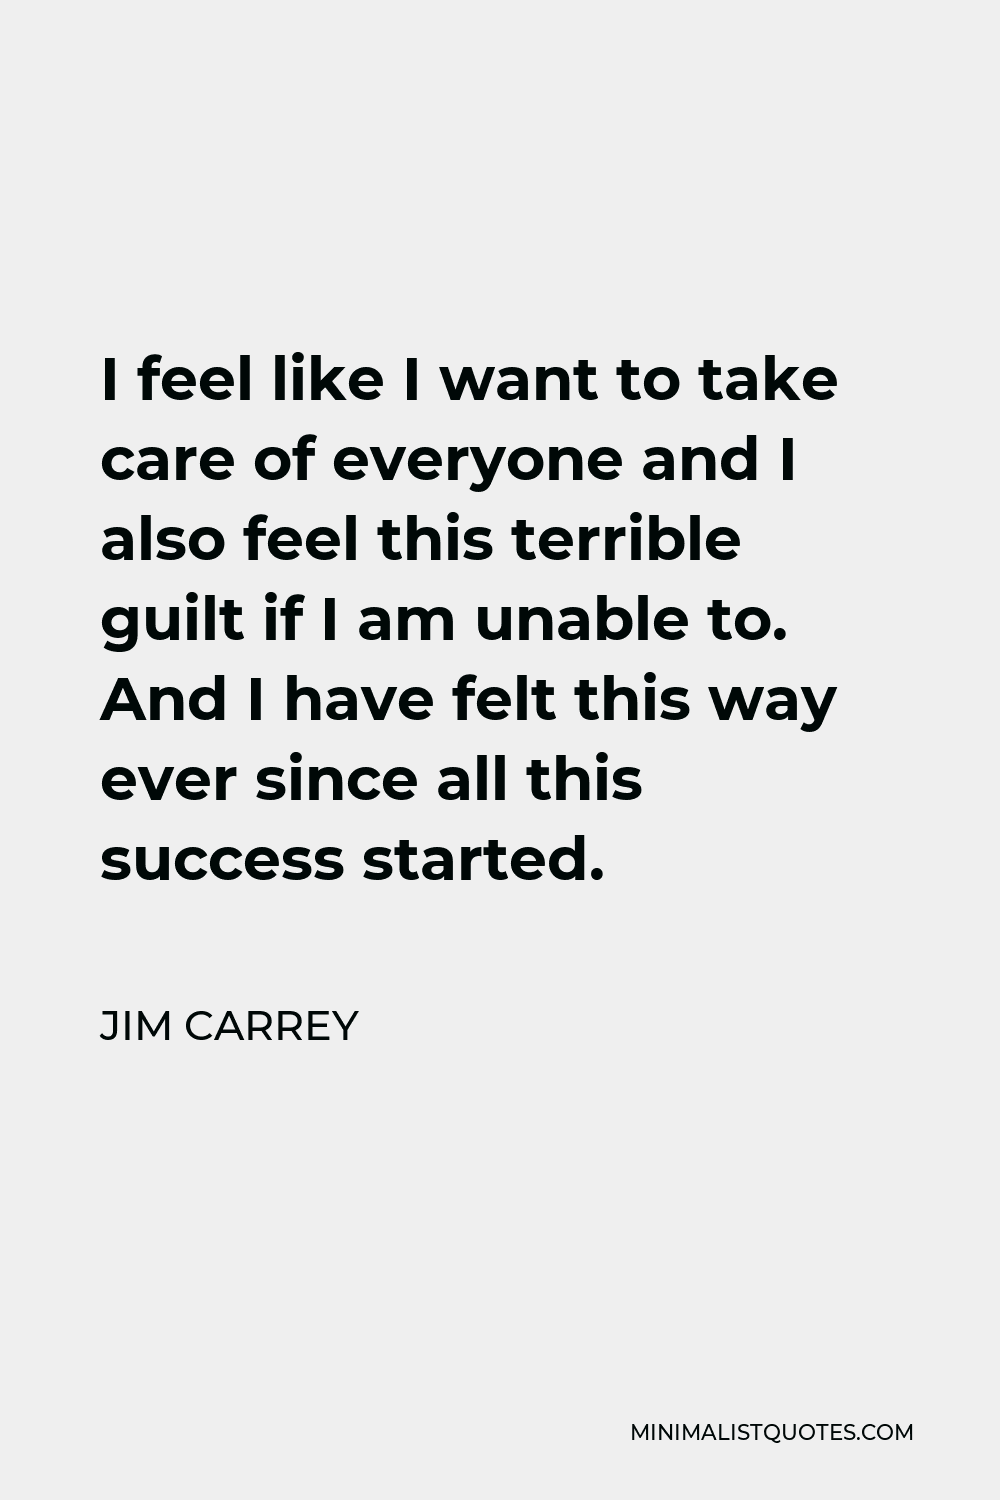 Jim Carrey Quote - I feel like I want to take care of everyone and I also feel this terrible guilt if I am unable to. And I have felt this way ever since all this success started.